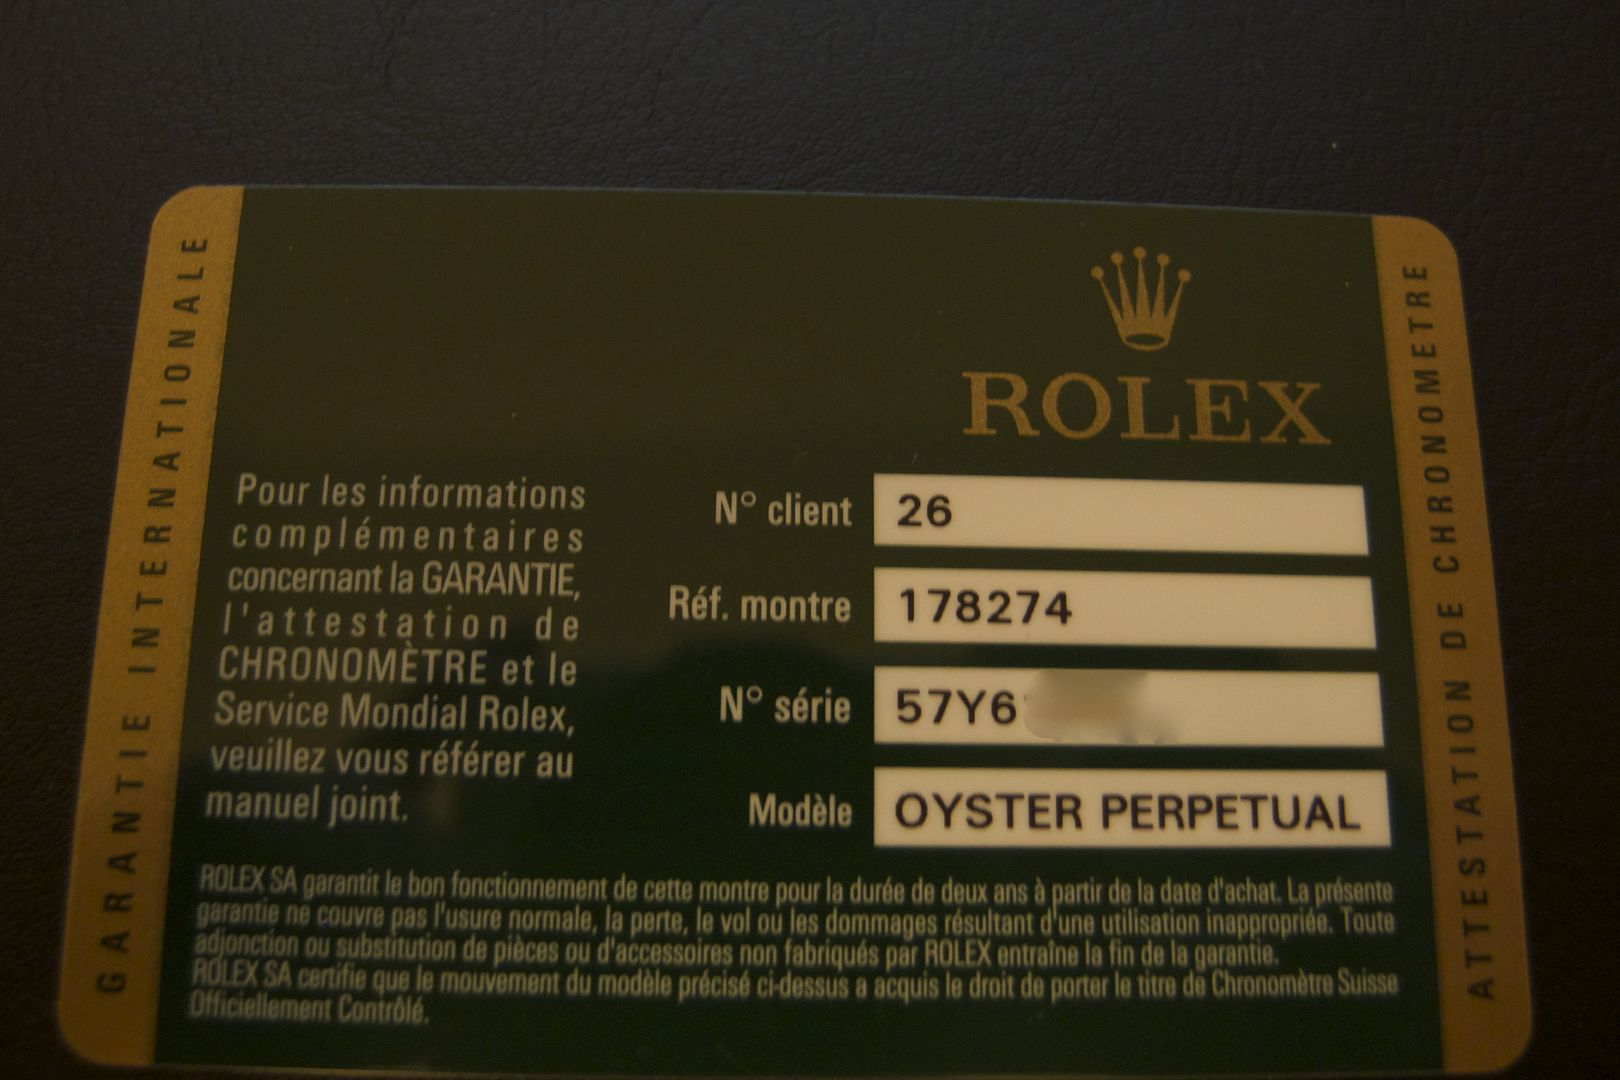  Rolex Country Codes On Warranty Cards Explained- Rolex Country Code Chart-Rolex Country Code Explained